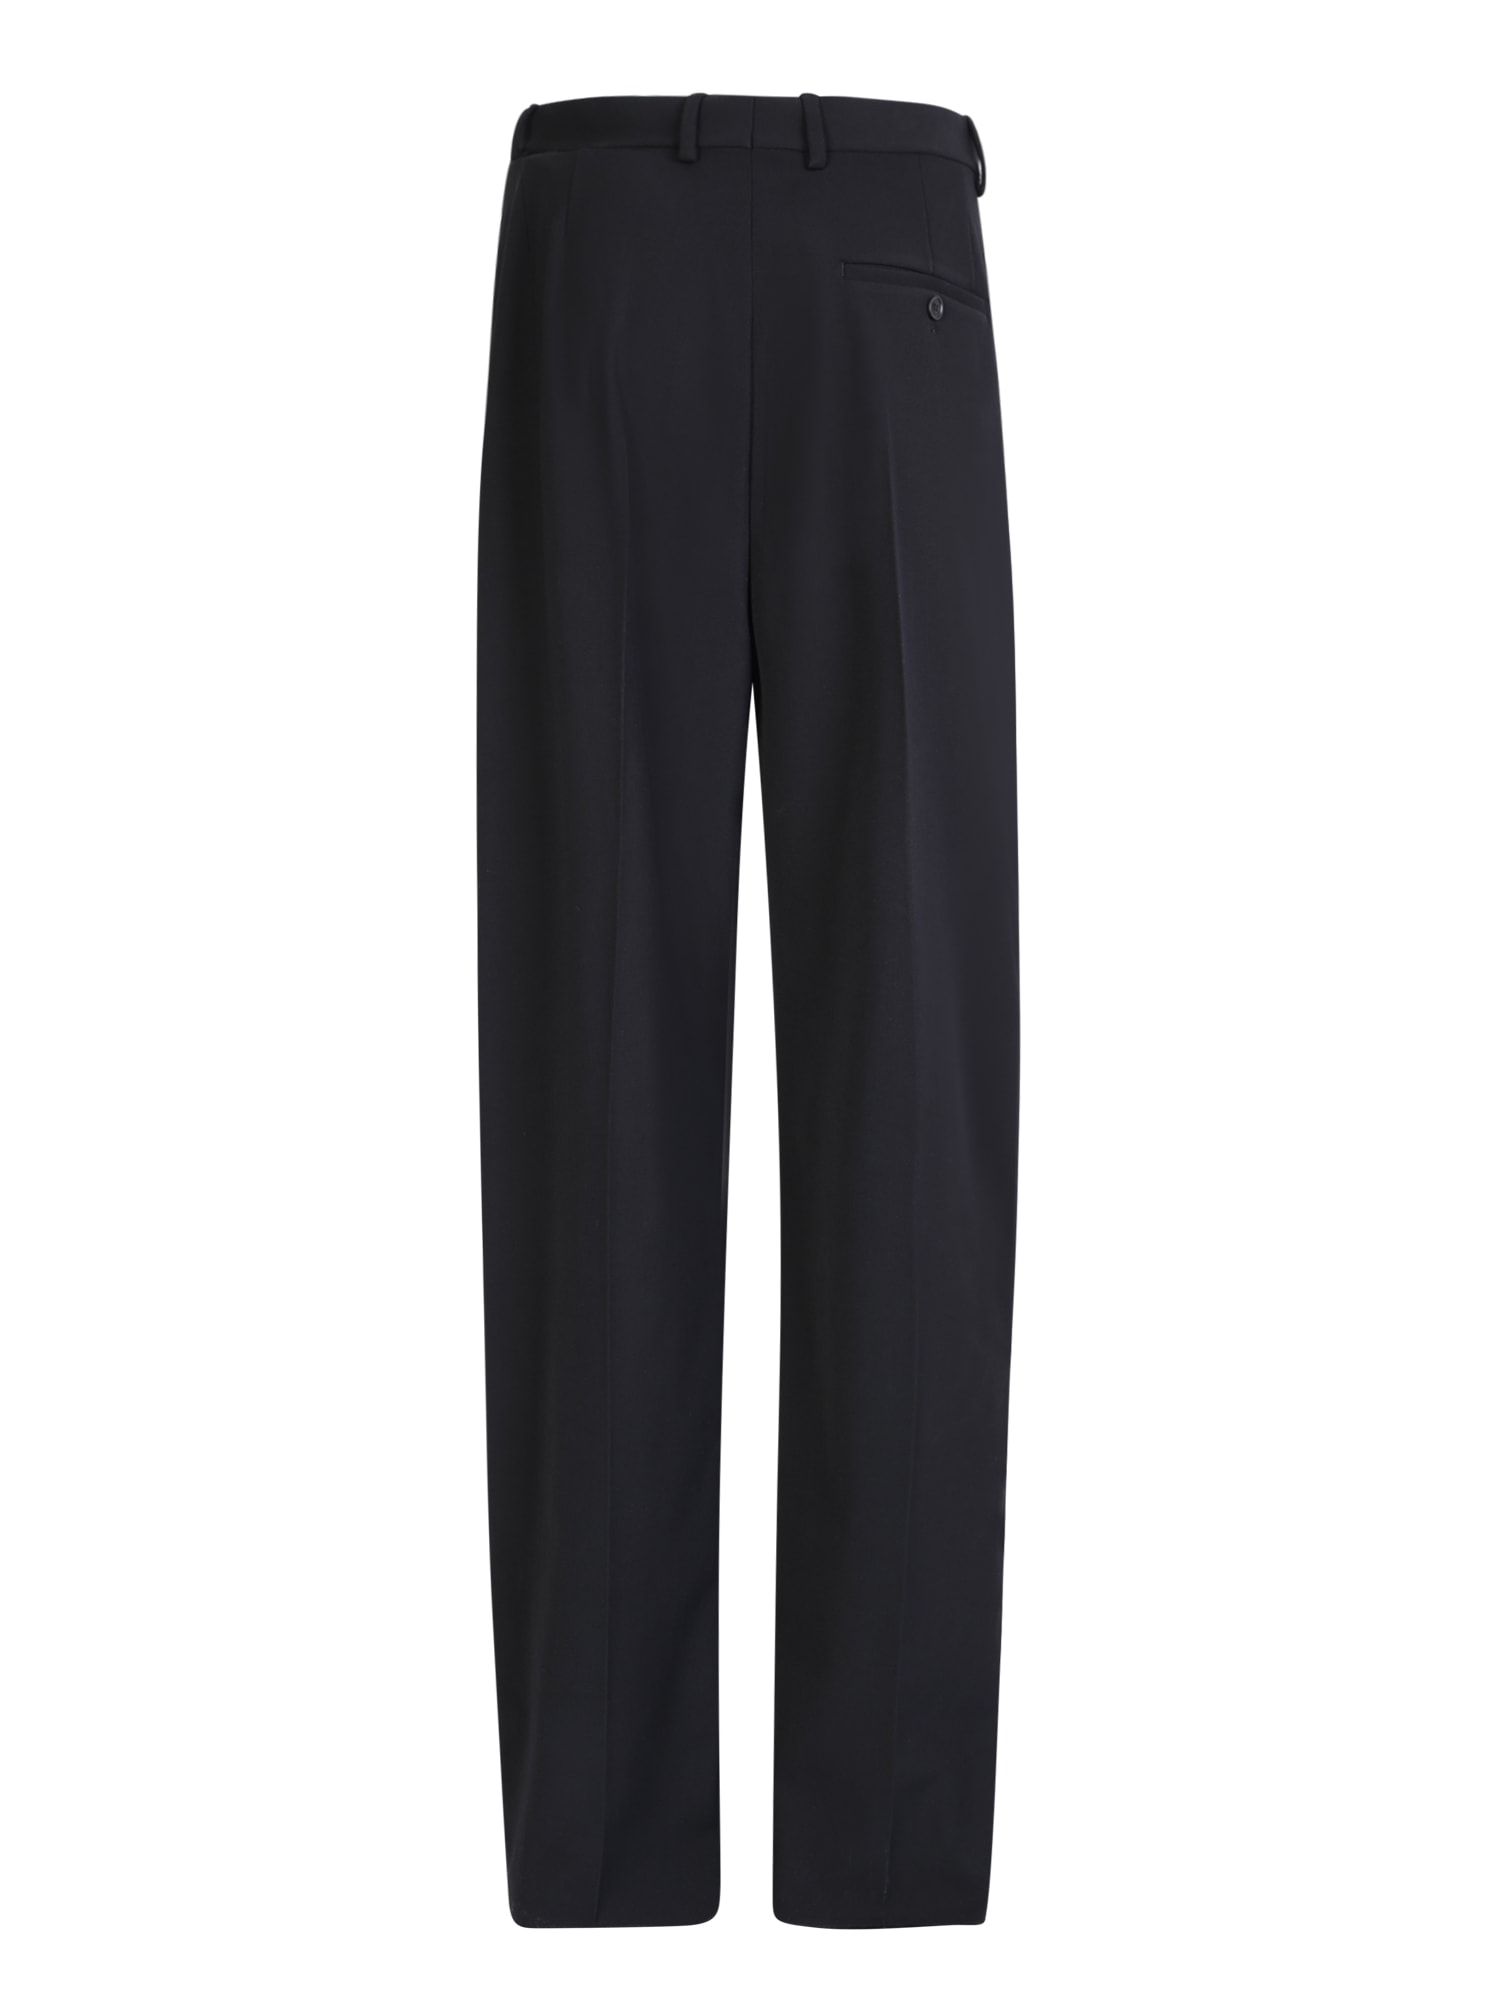 Shop Balenciaga Black Tailored Large Fit Trousers